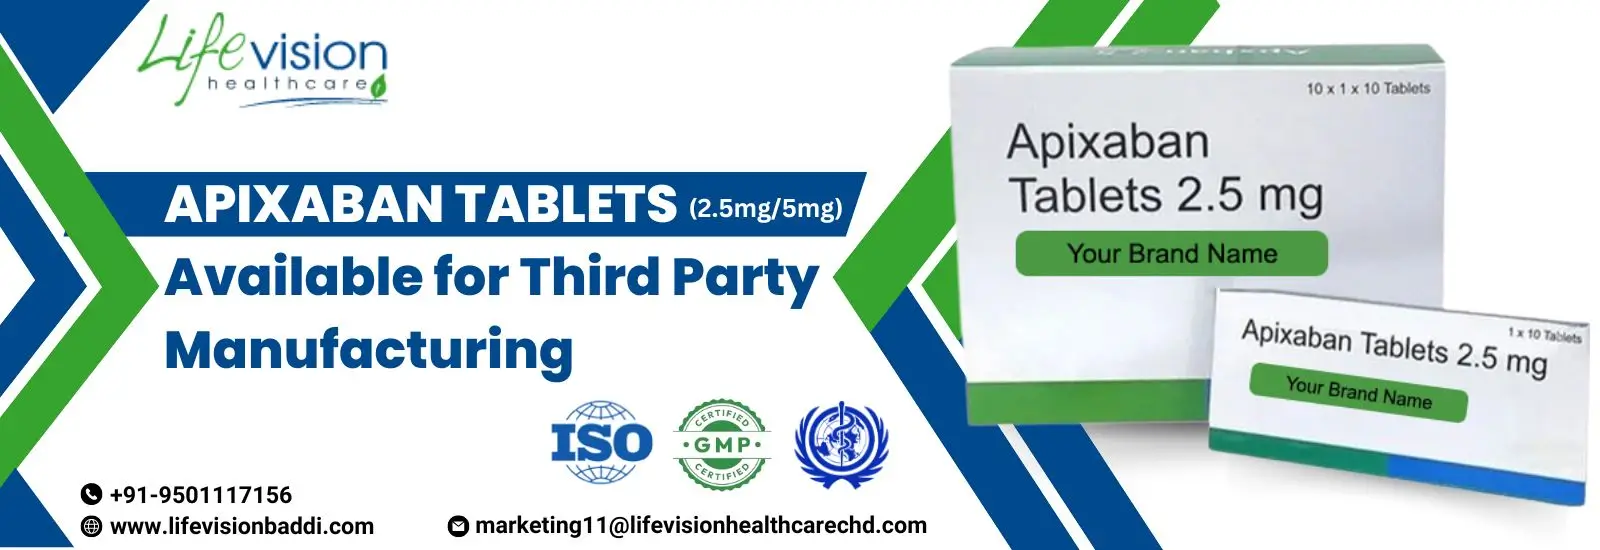 India’s Notable Apixaban Tablets Manufacturing Company | Lifevision Healthcare